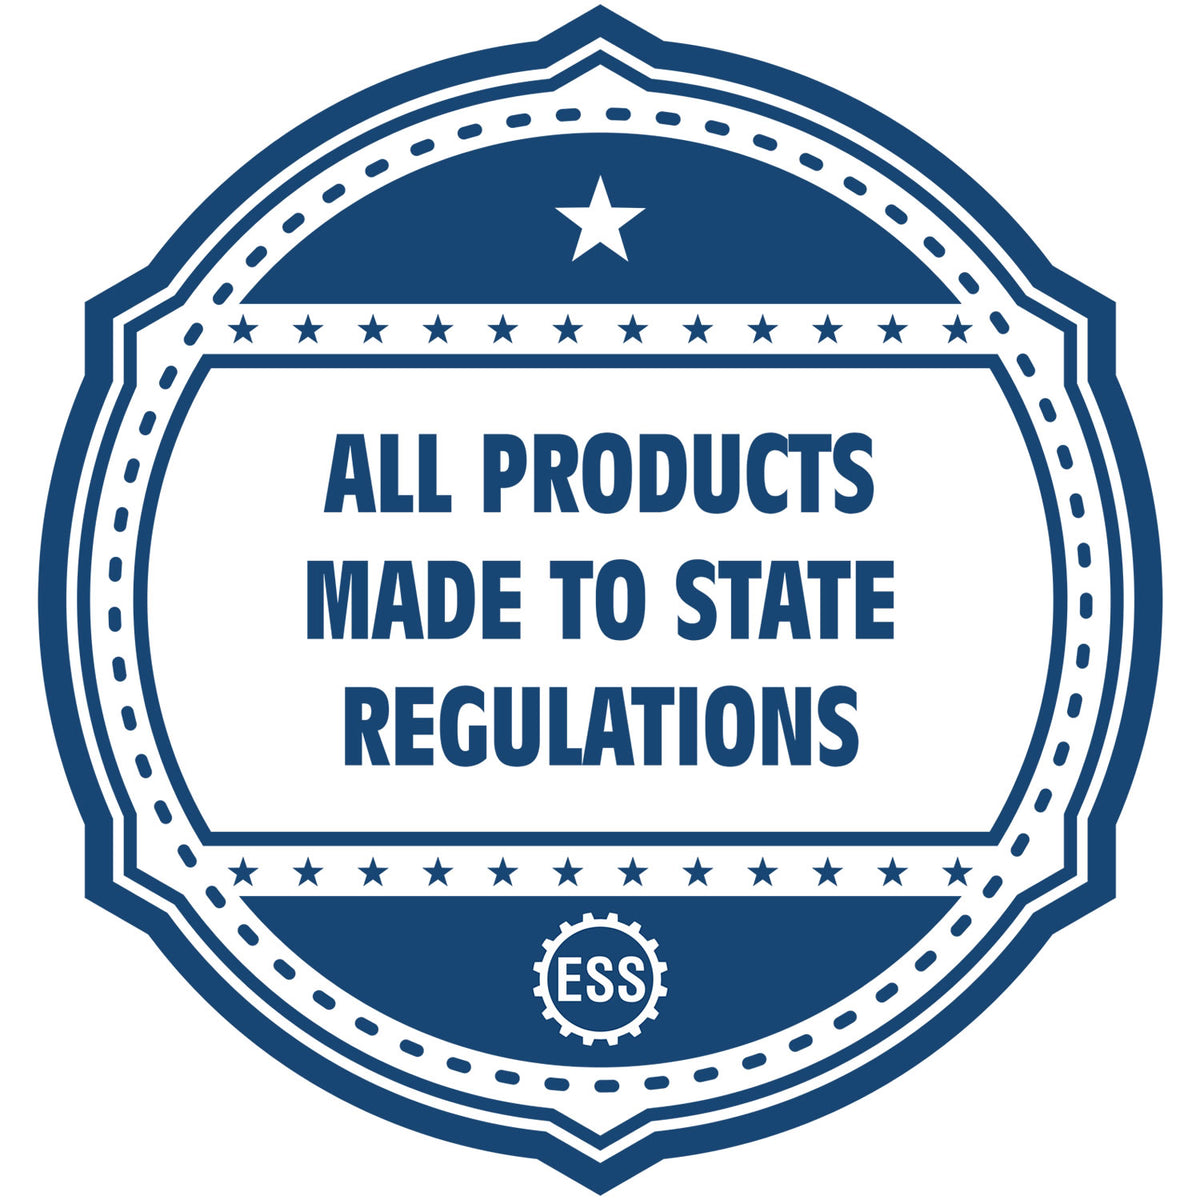 An icon or badge element for the Slim Pre-Inked State Seal Notary Stamp for Alabama showing that this product is made in compliance with state regulations.